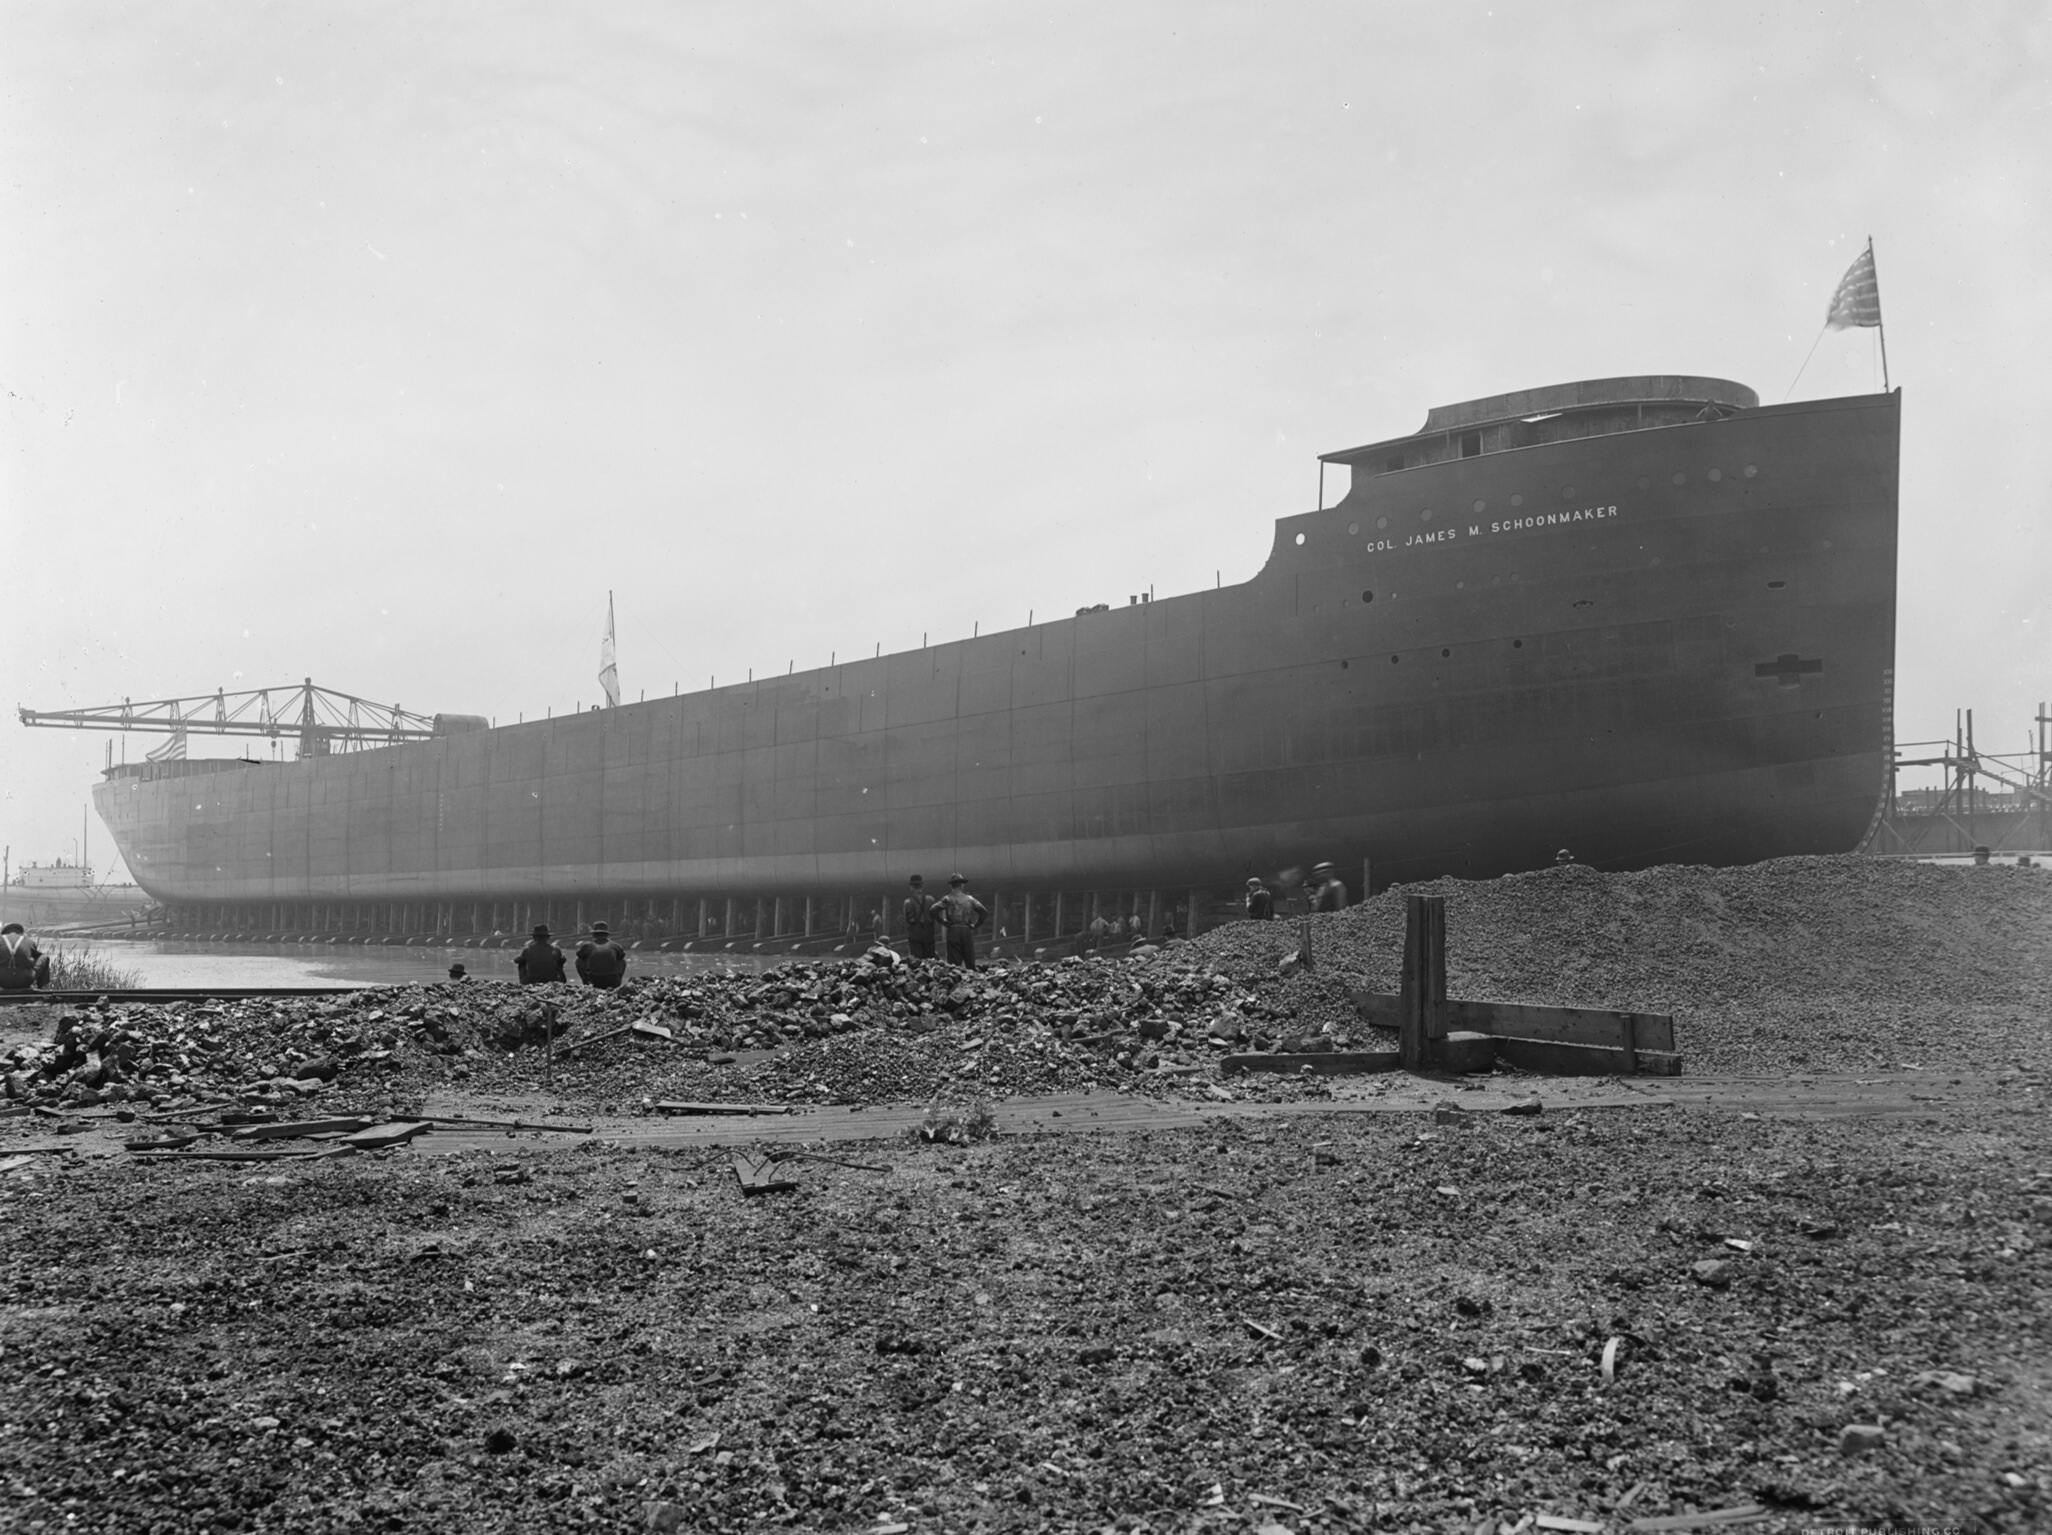 The Col. James M. Schoonmaker prior to launching in 1911